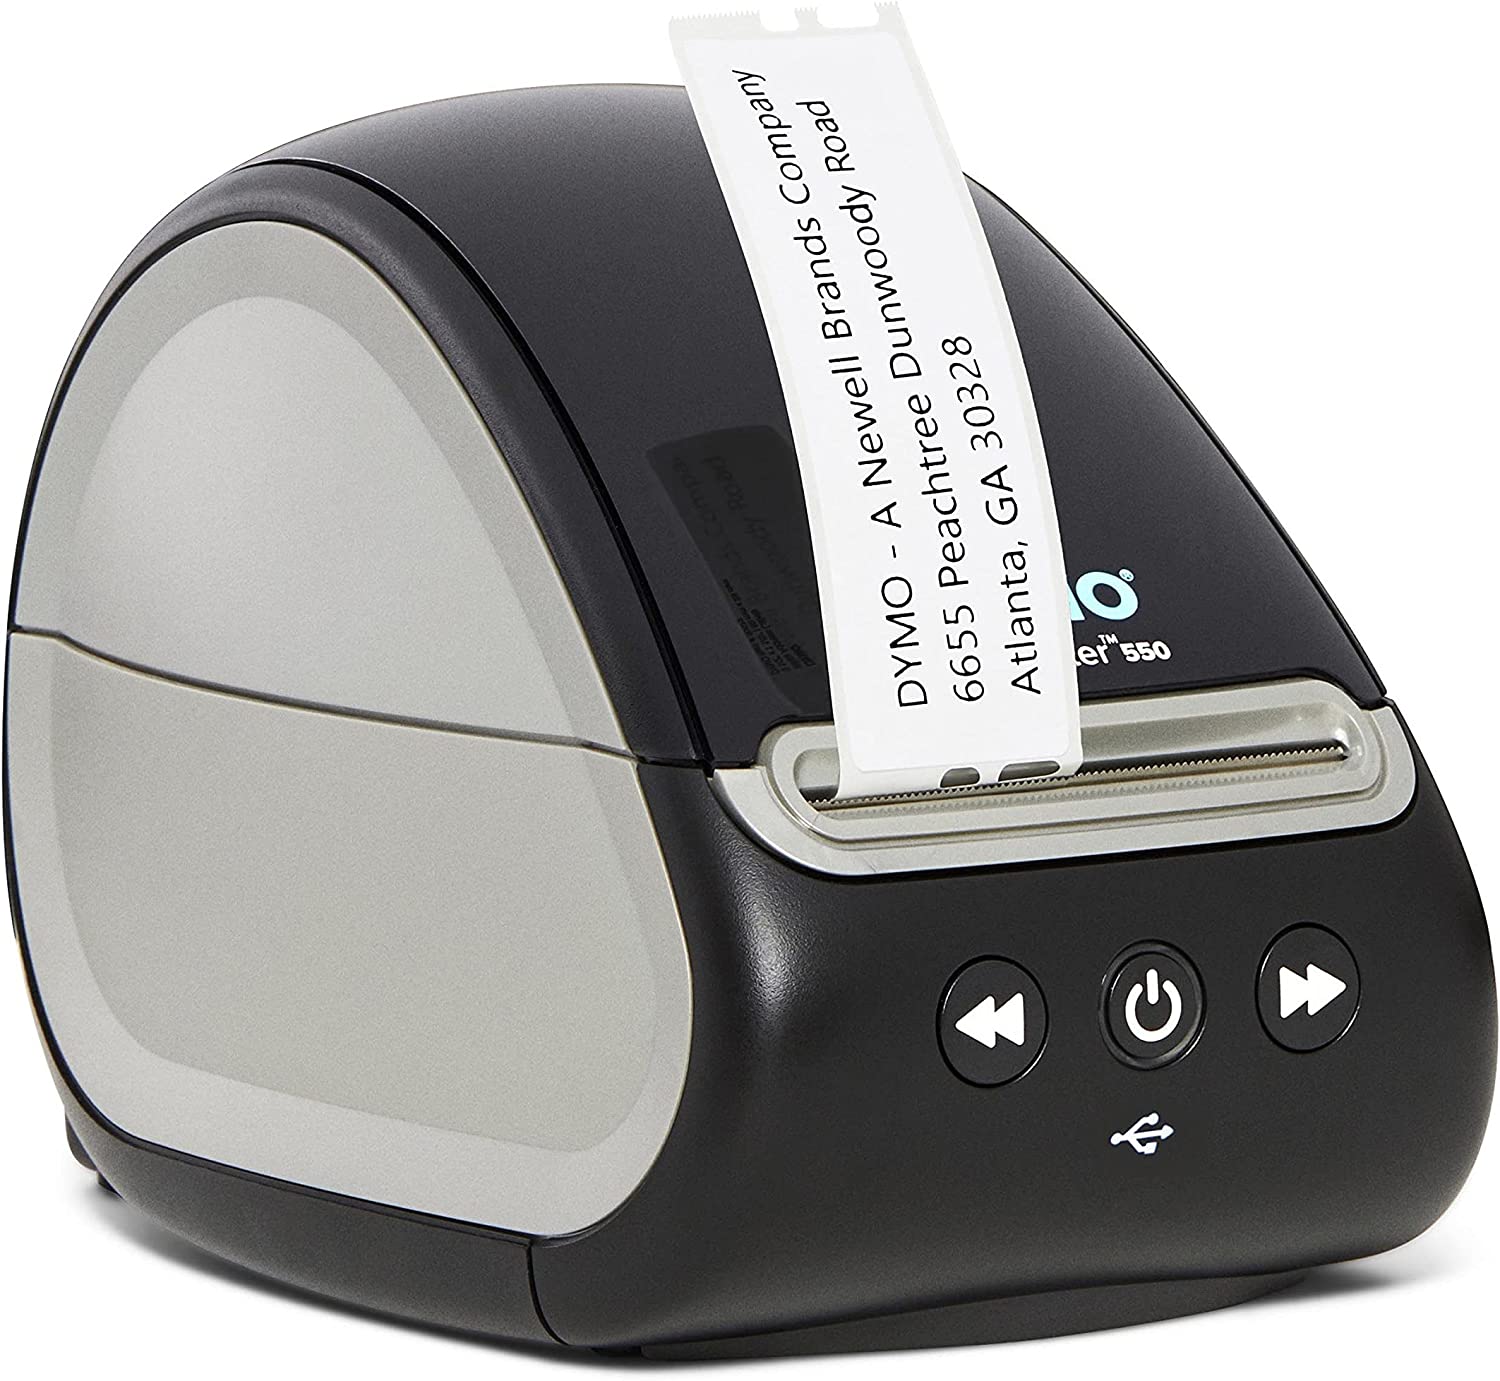 DYMO LabelWriter 550 Label Printer, Label Maker with Direct Thermal Printing, Automatic Label Recognition, Prints Address Labels, Shipping Labels, Mailing Labels, Barcode Labels, and More